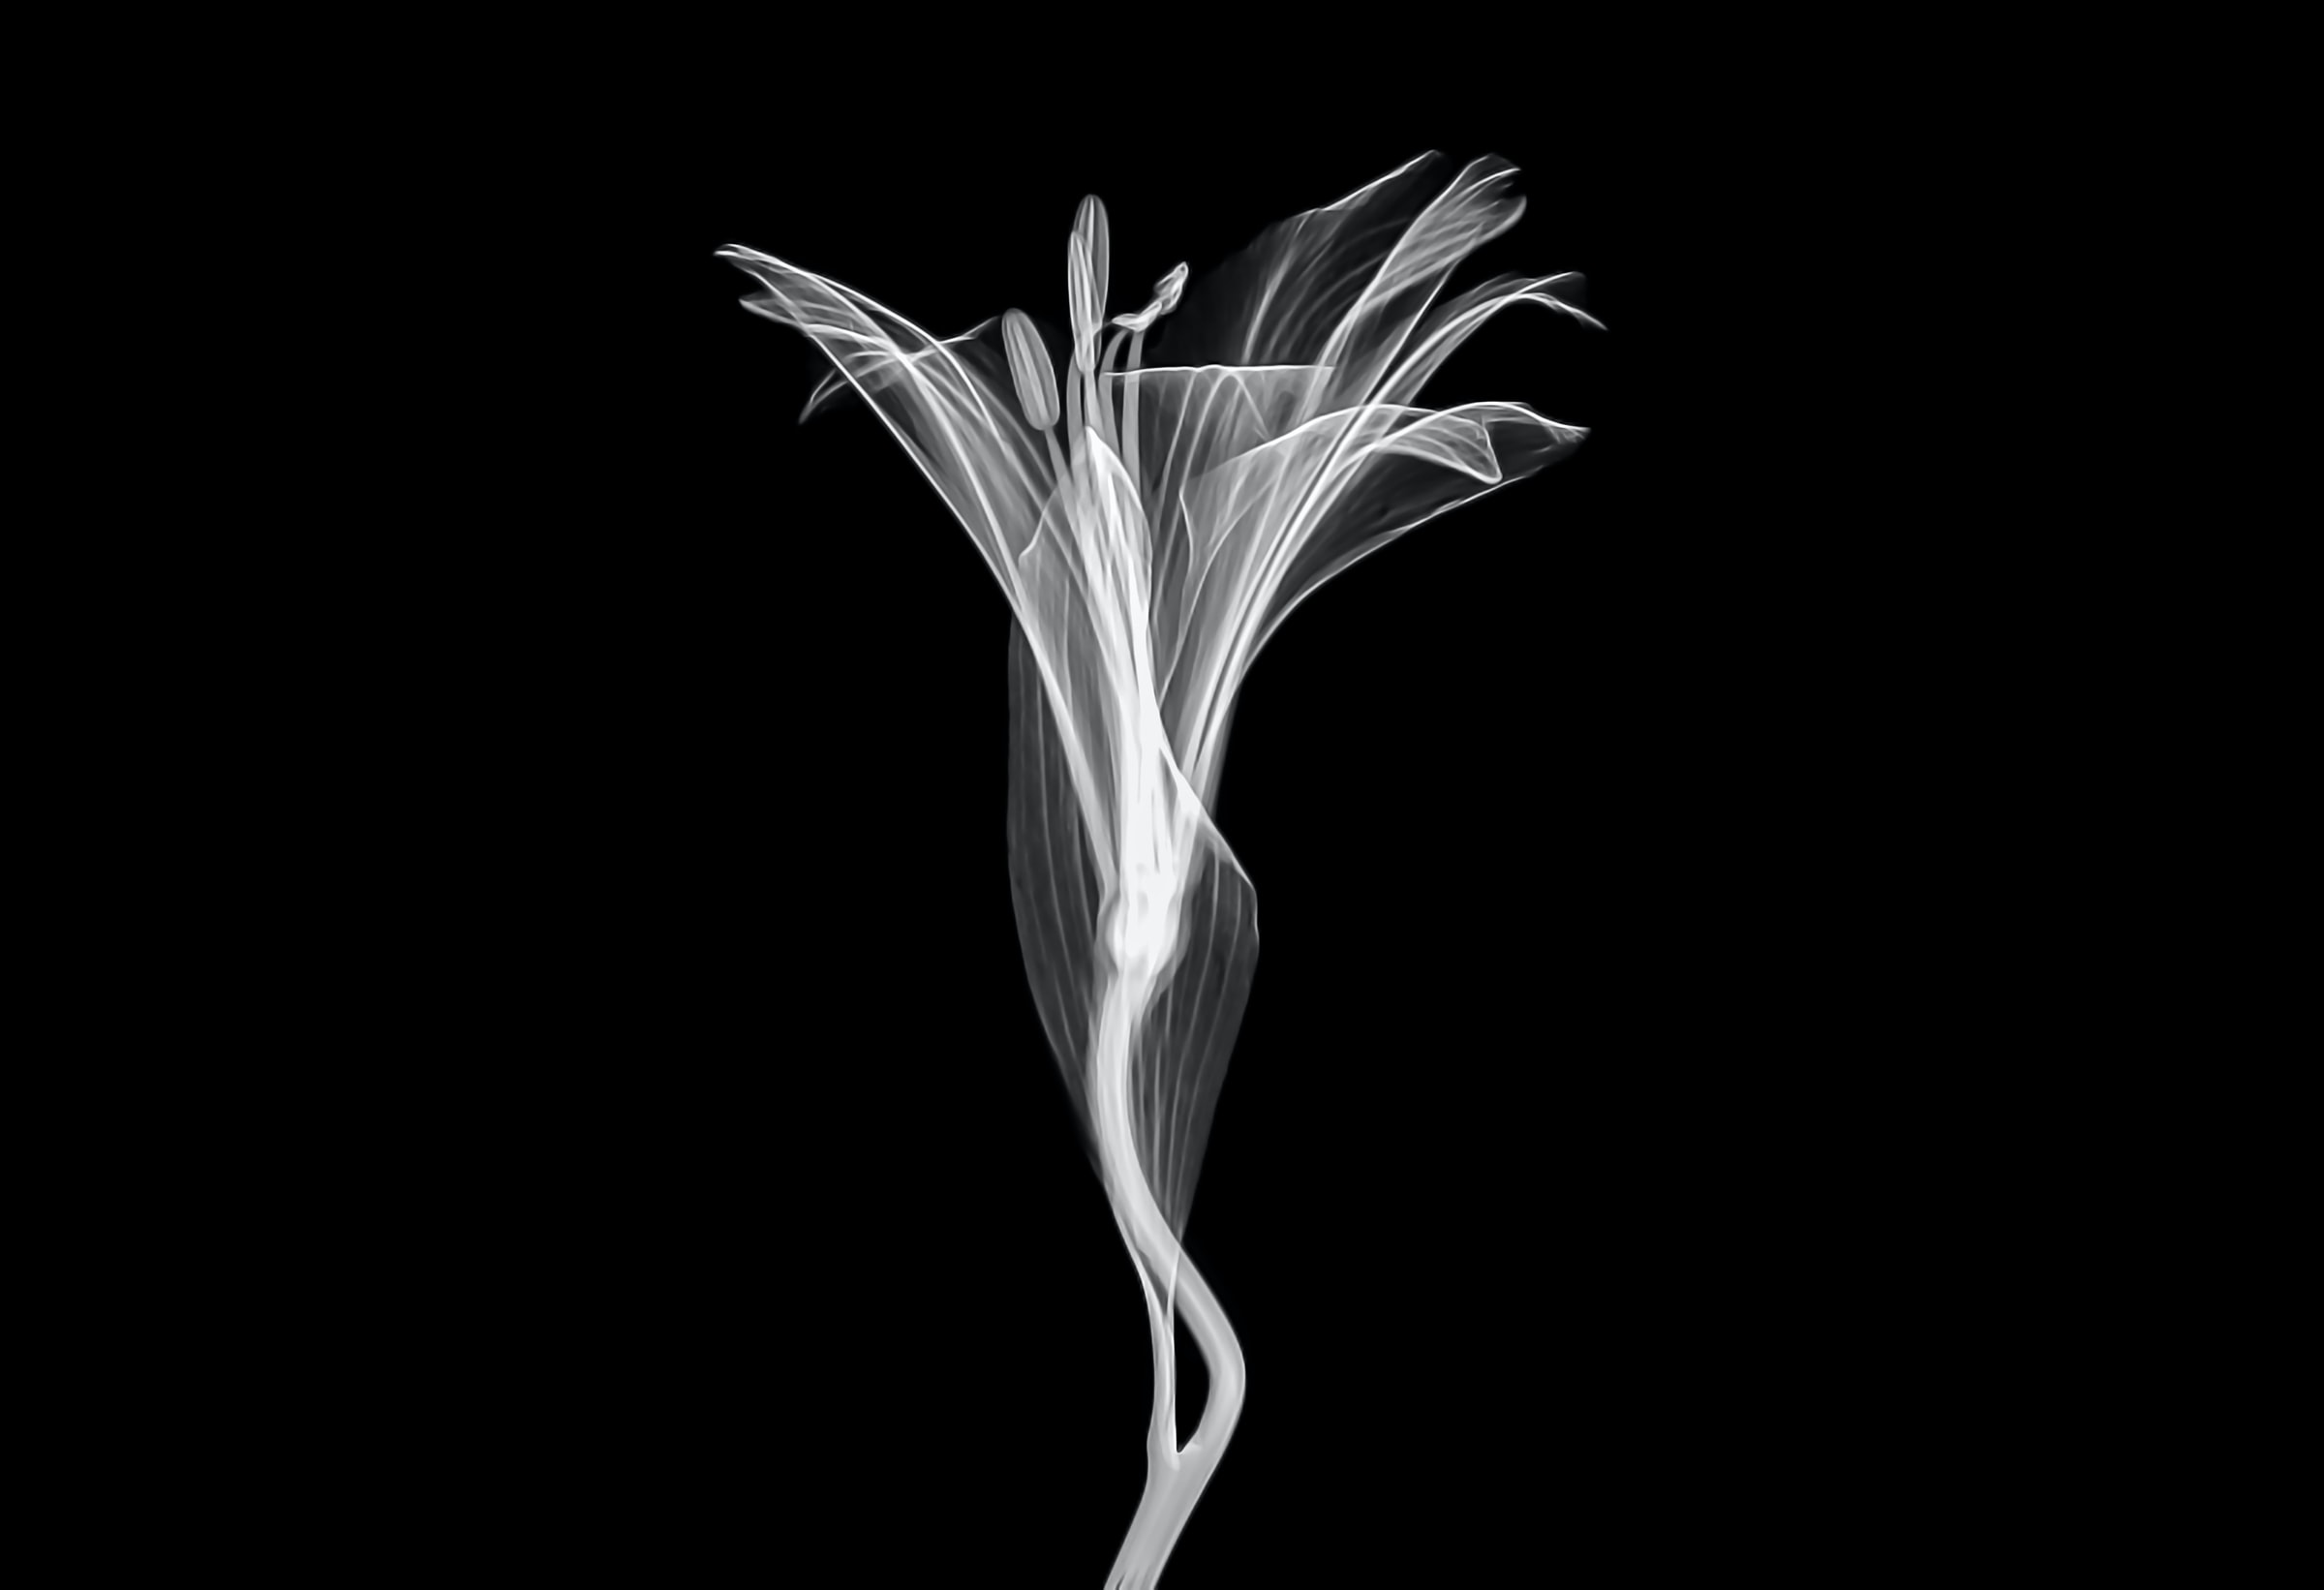 X ray of an orchid by Mathew Schwartz